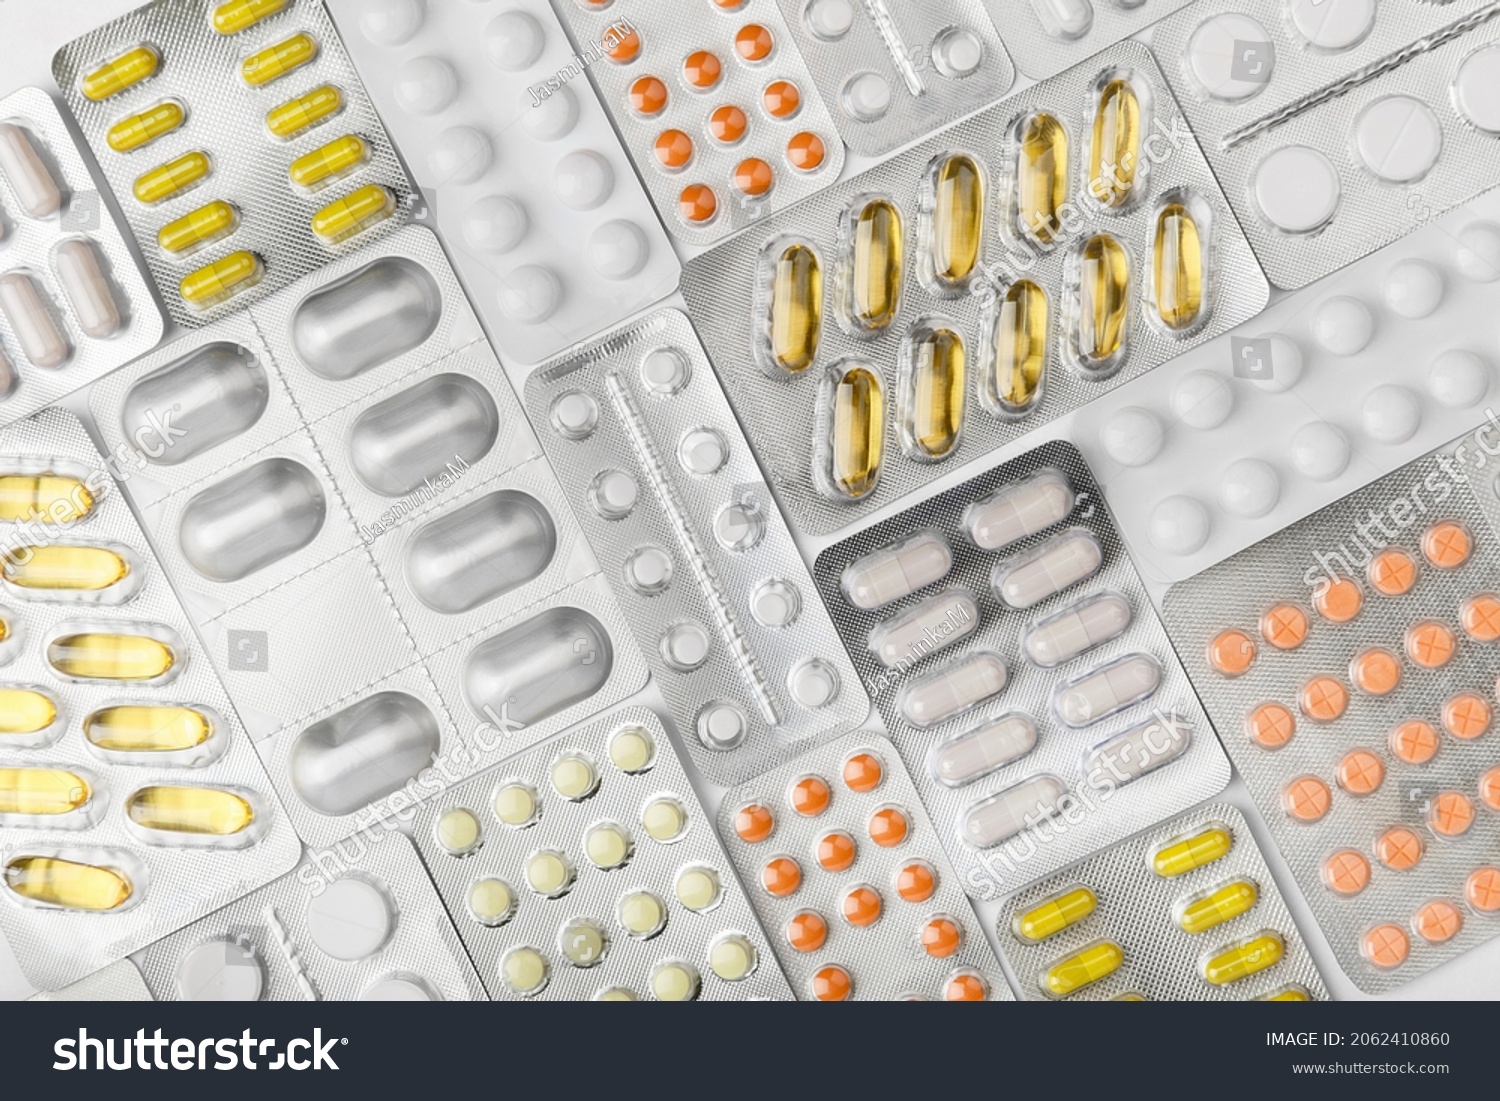 Background fill of many blisters of medical pills, tablets. Treatment concept. Top view of pharmacy drug. Healthcare concept. pharmaceutical background from medicaments. Vitamin #2062410860